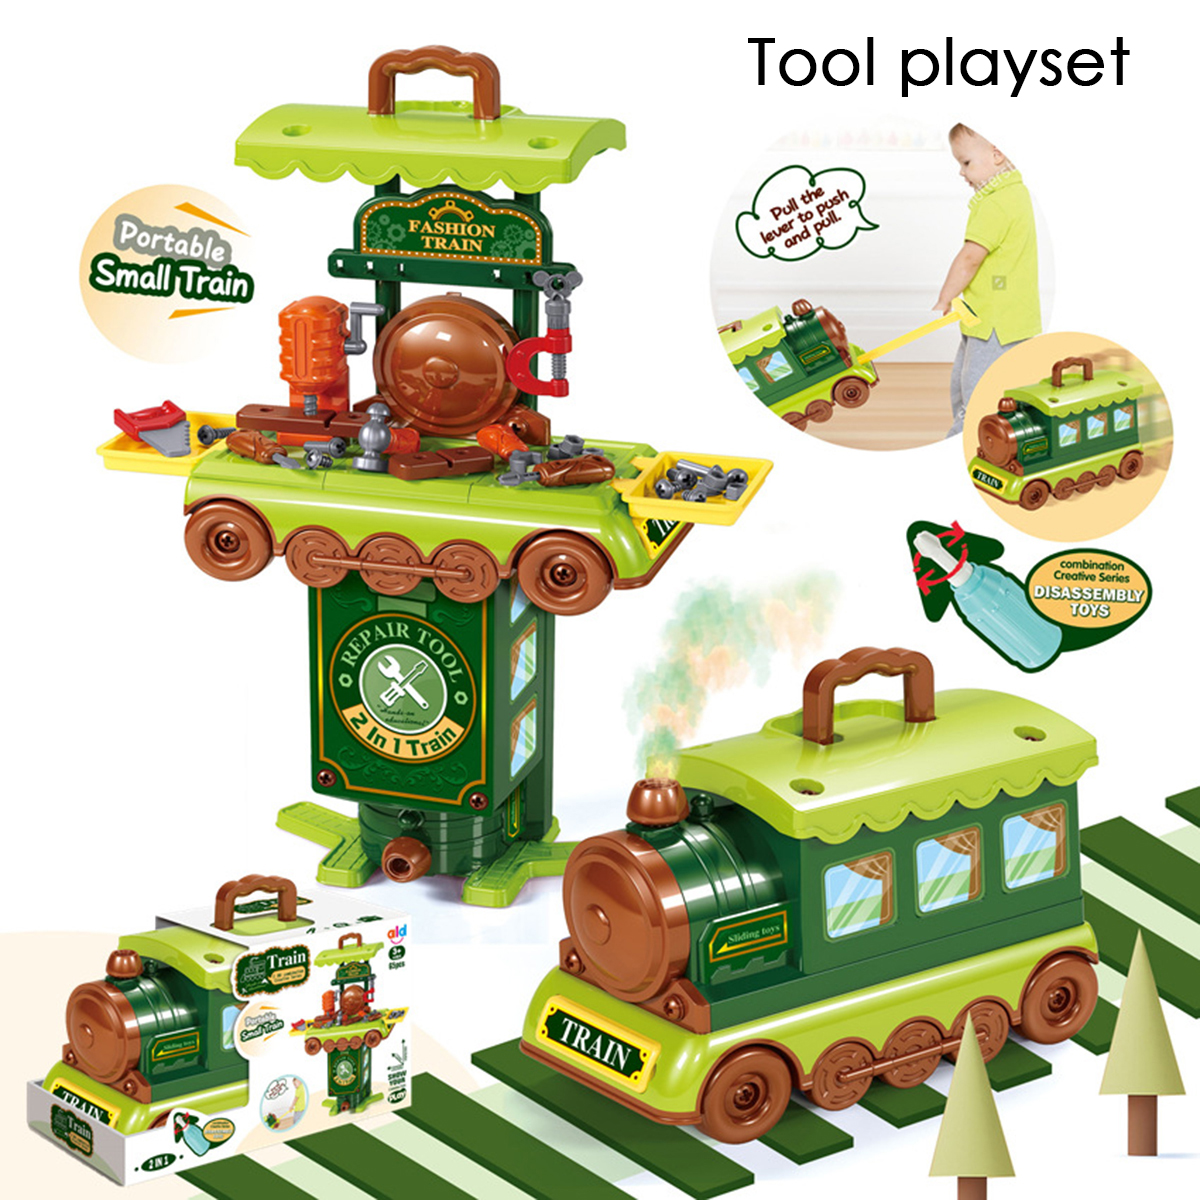 2-IN-1-Multi-style-Kitchen-Cooking-Play-and-Portable-Small-Train-Learning-Set-Toys-for-Kids-Gift-1673927-3